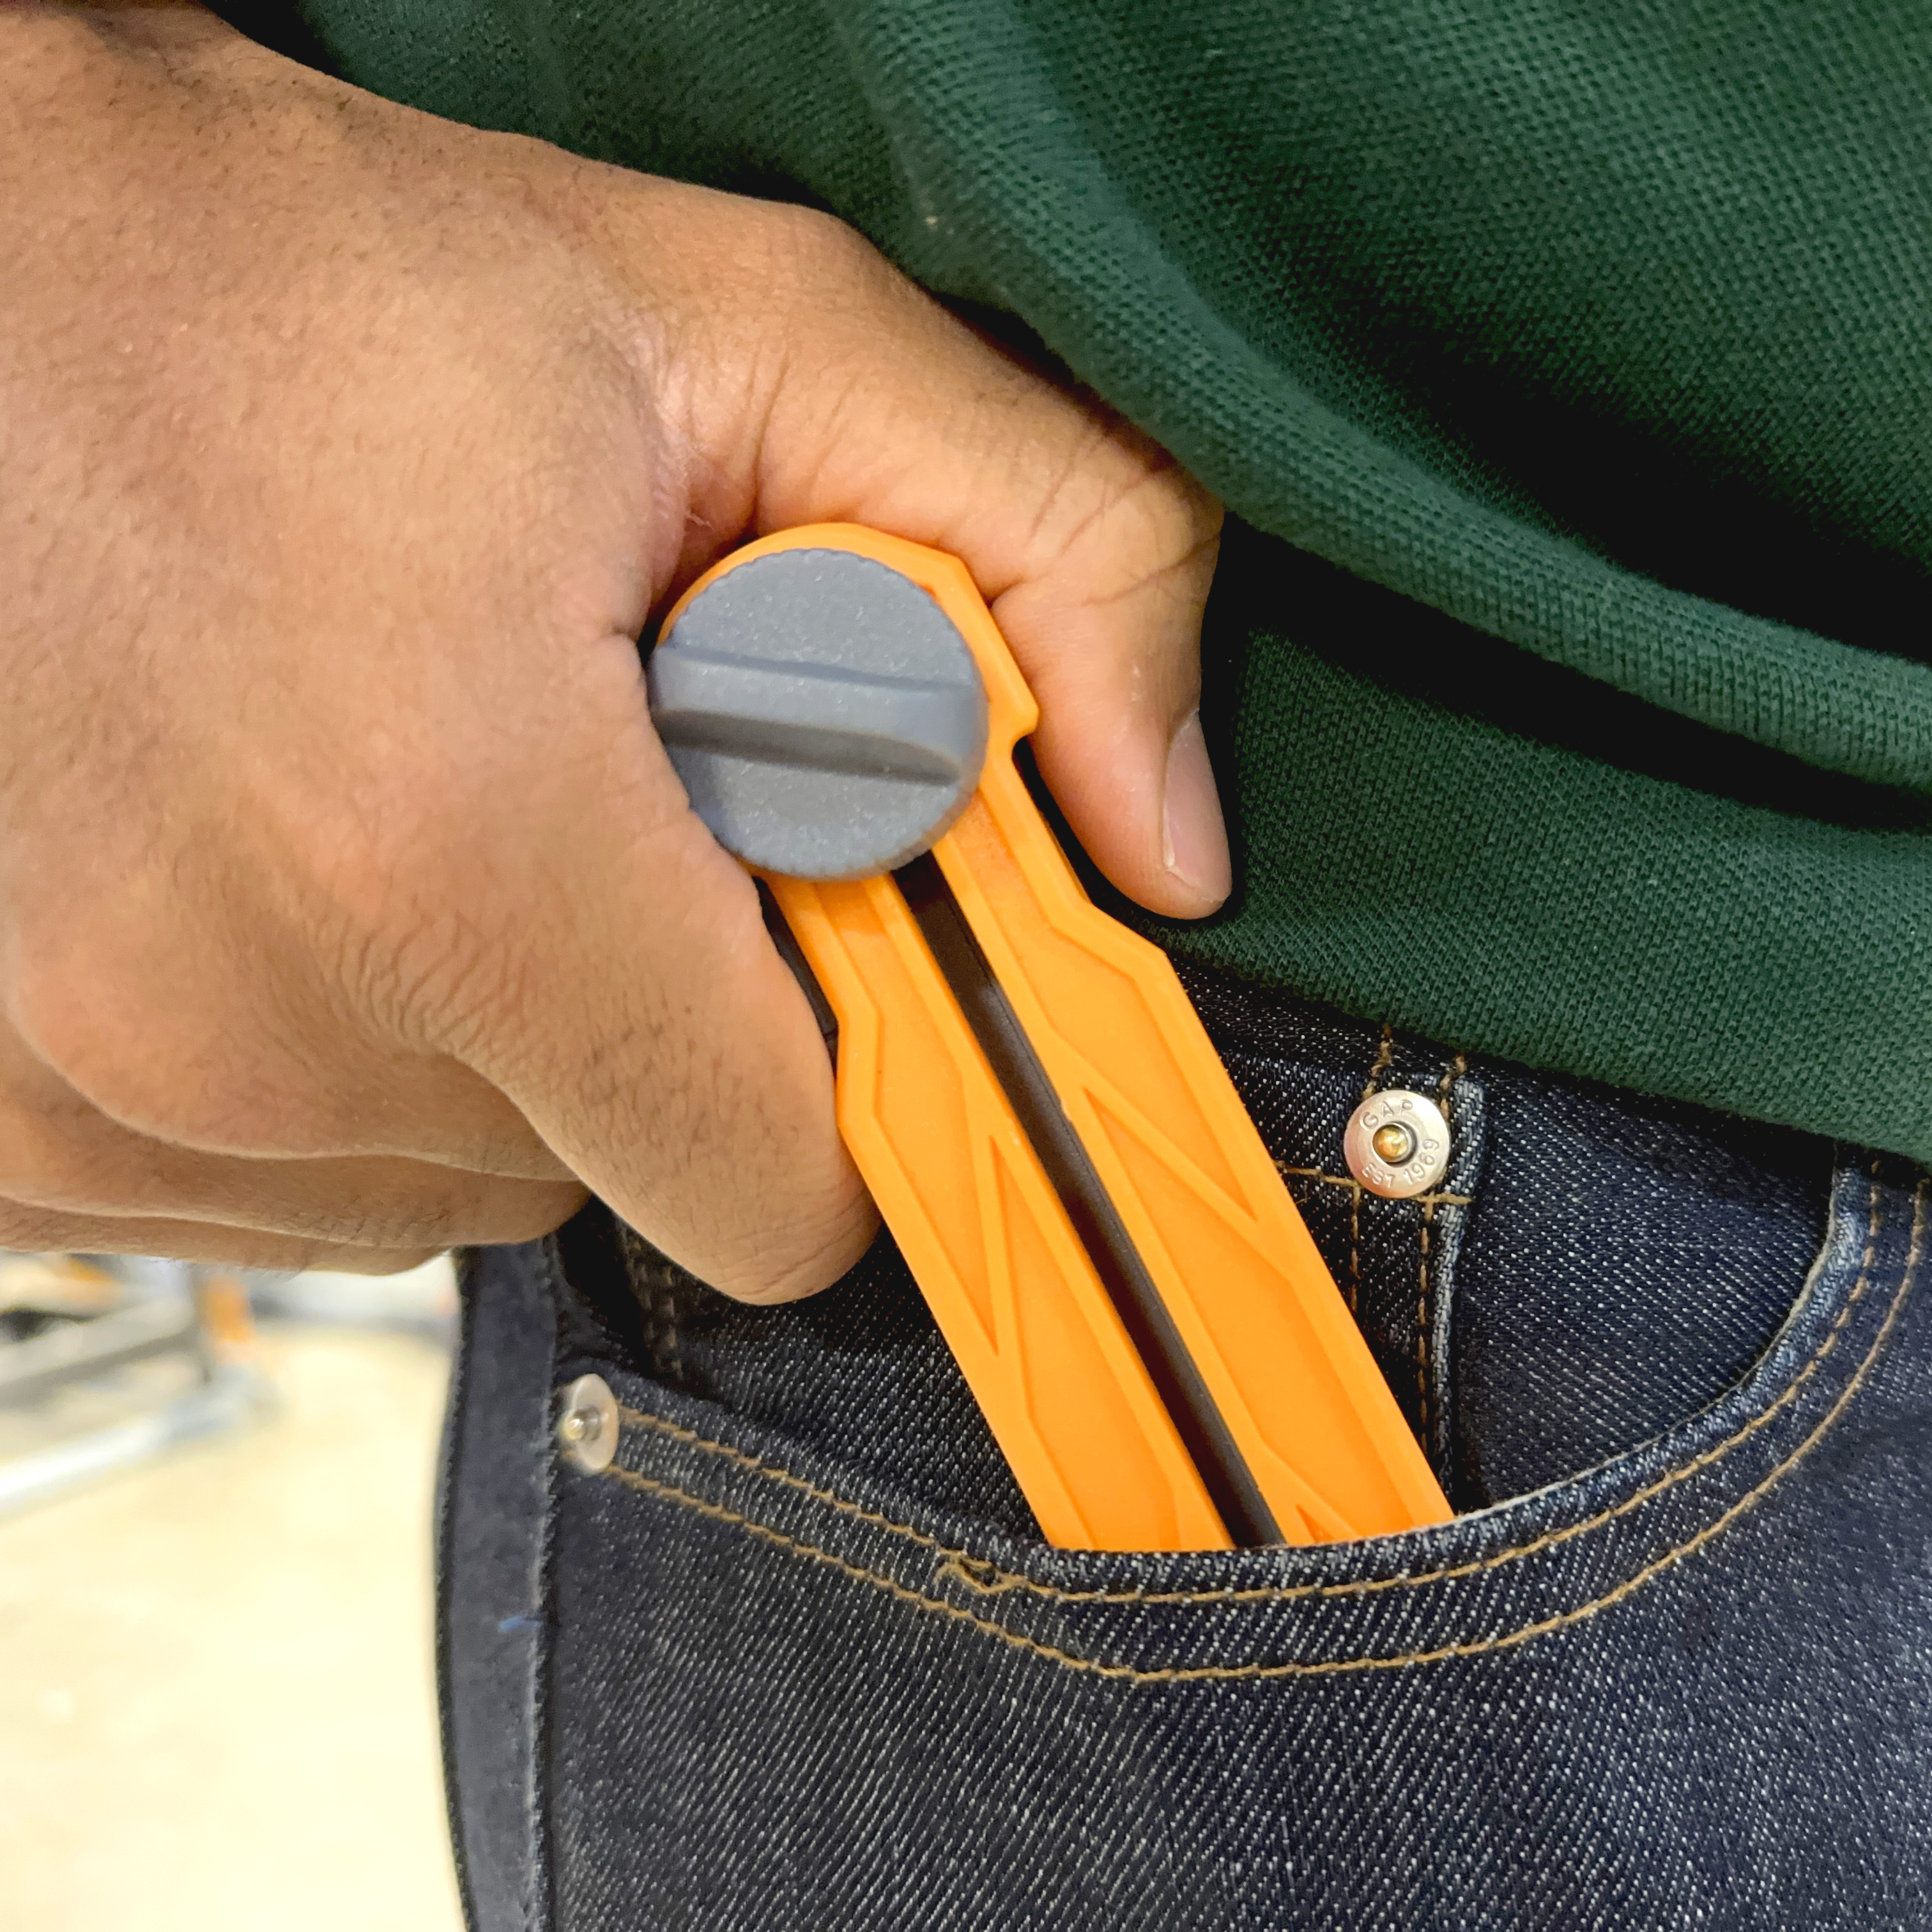 A BORA MiteriX Compact easily being stored in a pocket.